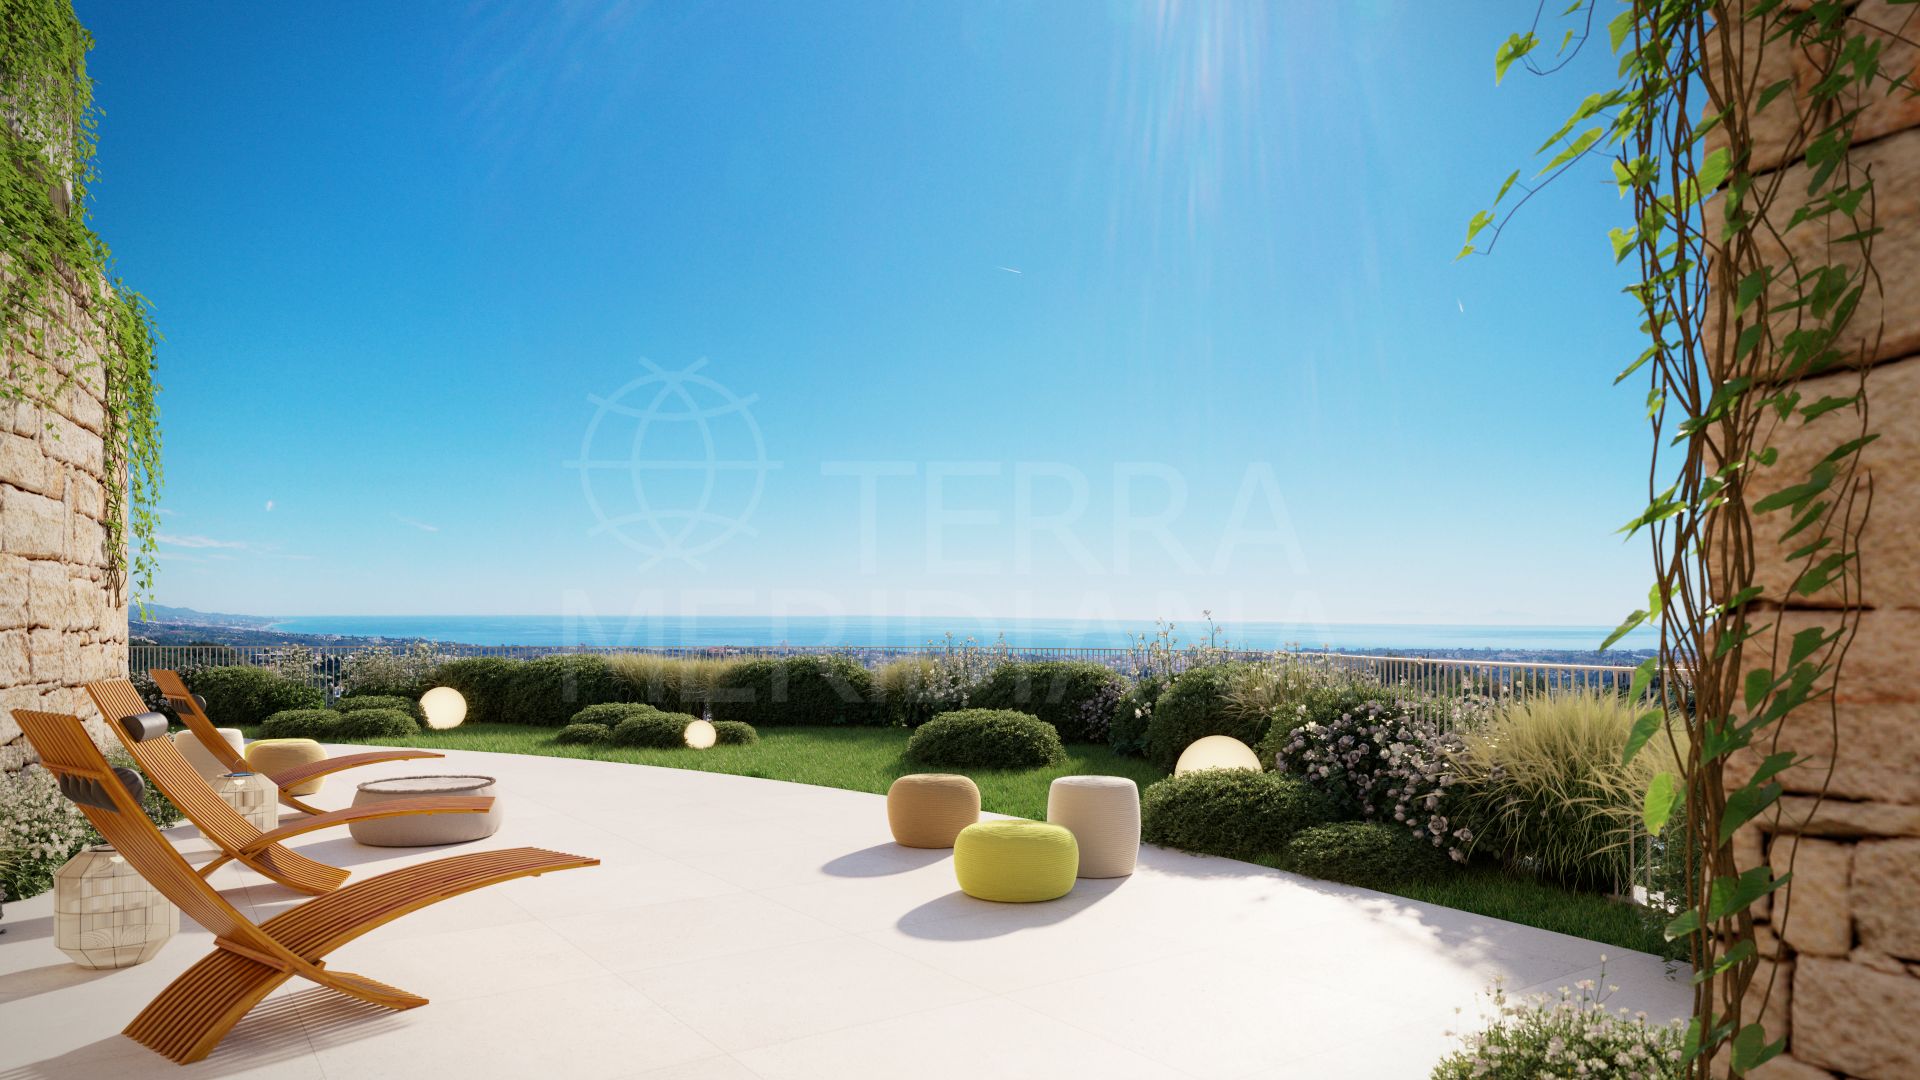 Off-plan 4 bedroom penthouse with sea views for sale in the guard-gated community of The View Marbella, Benahavis